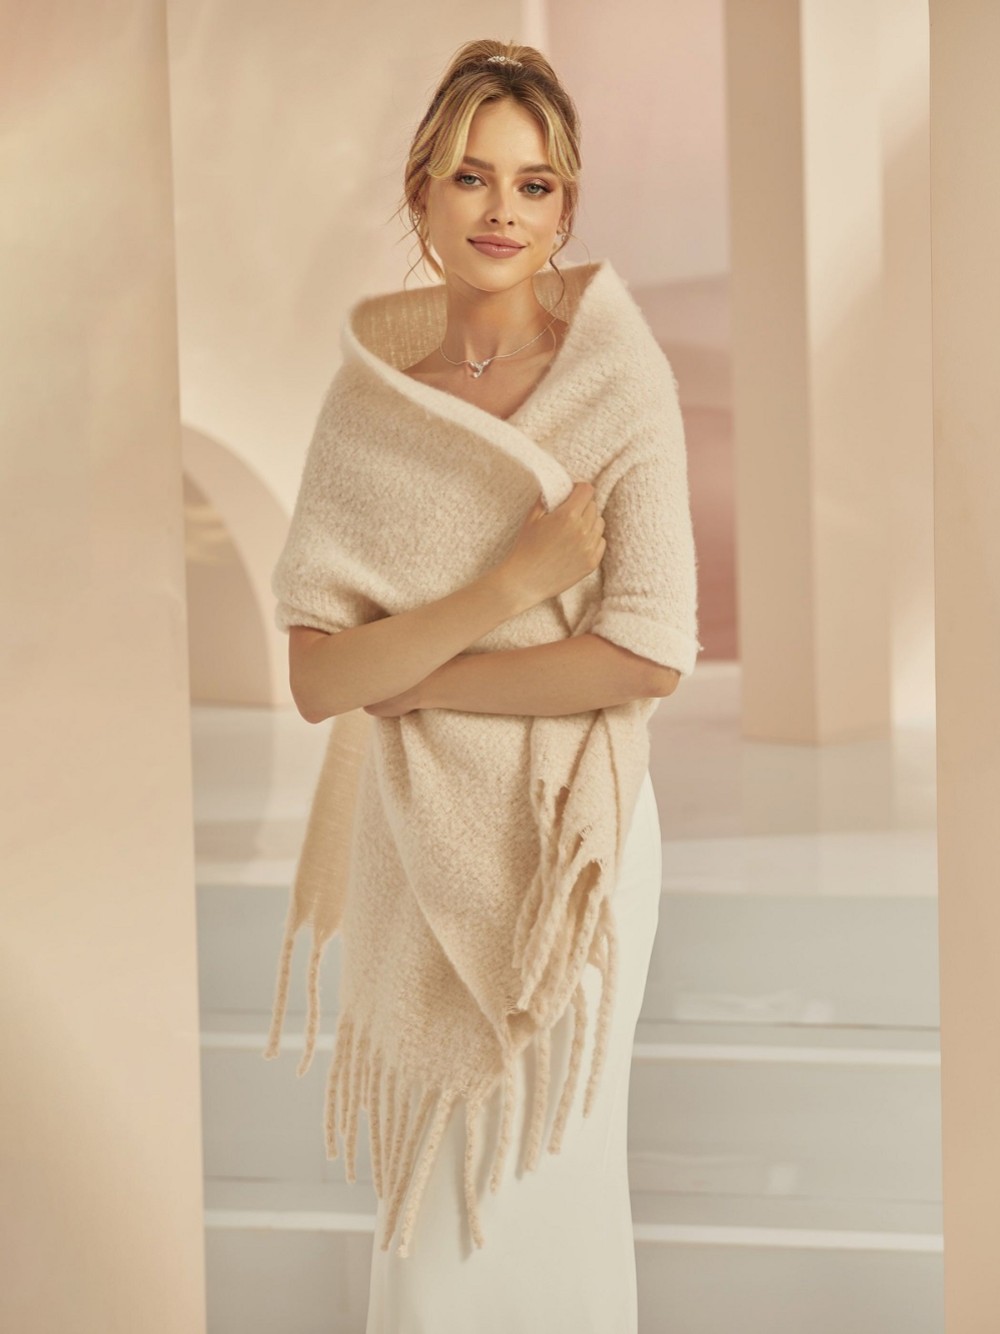 Photograph: Bianco Knitted Wedding Shawl with Tassels E383